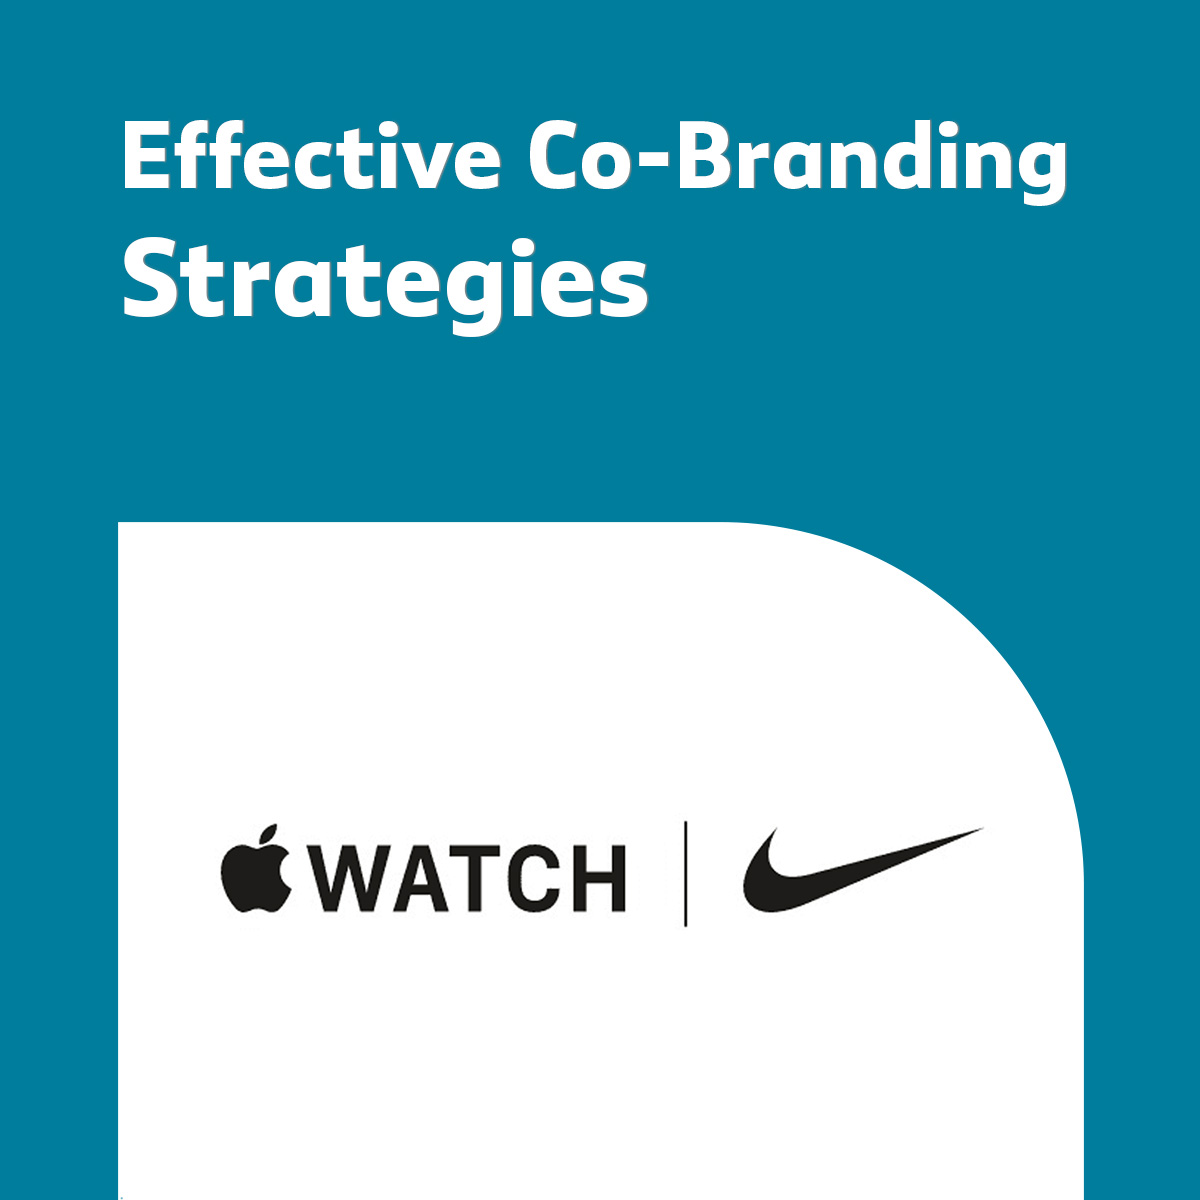 Co-Branding: 13 Tips for Growing Your Brand Through Strategic